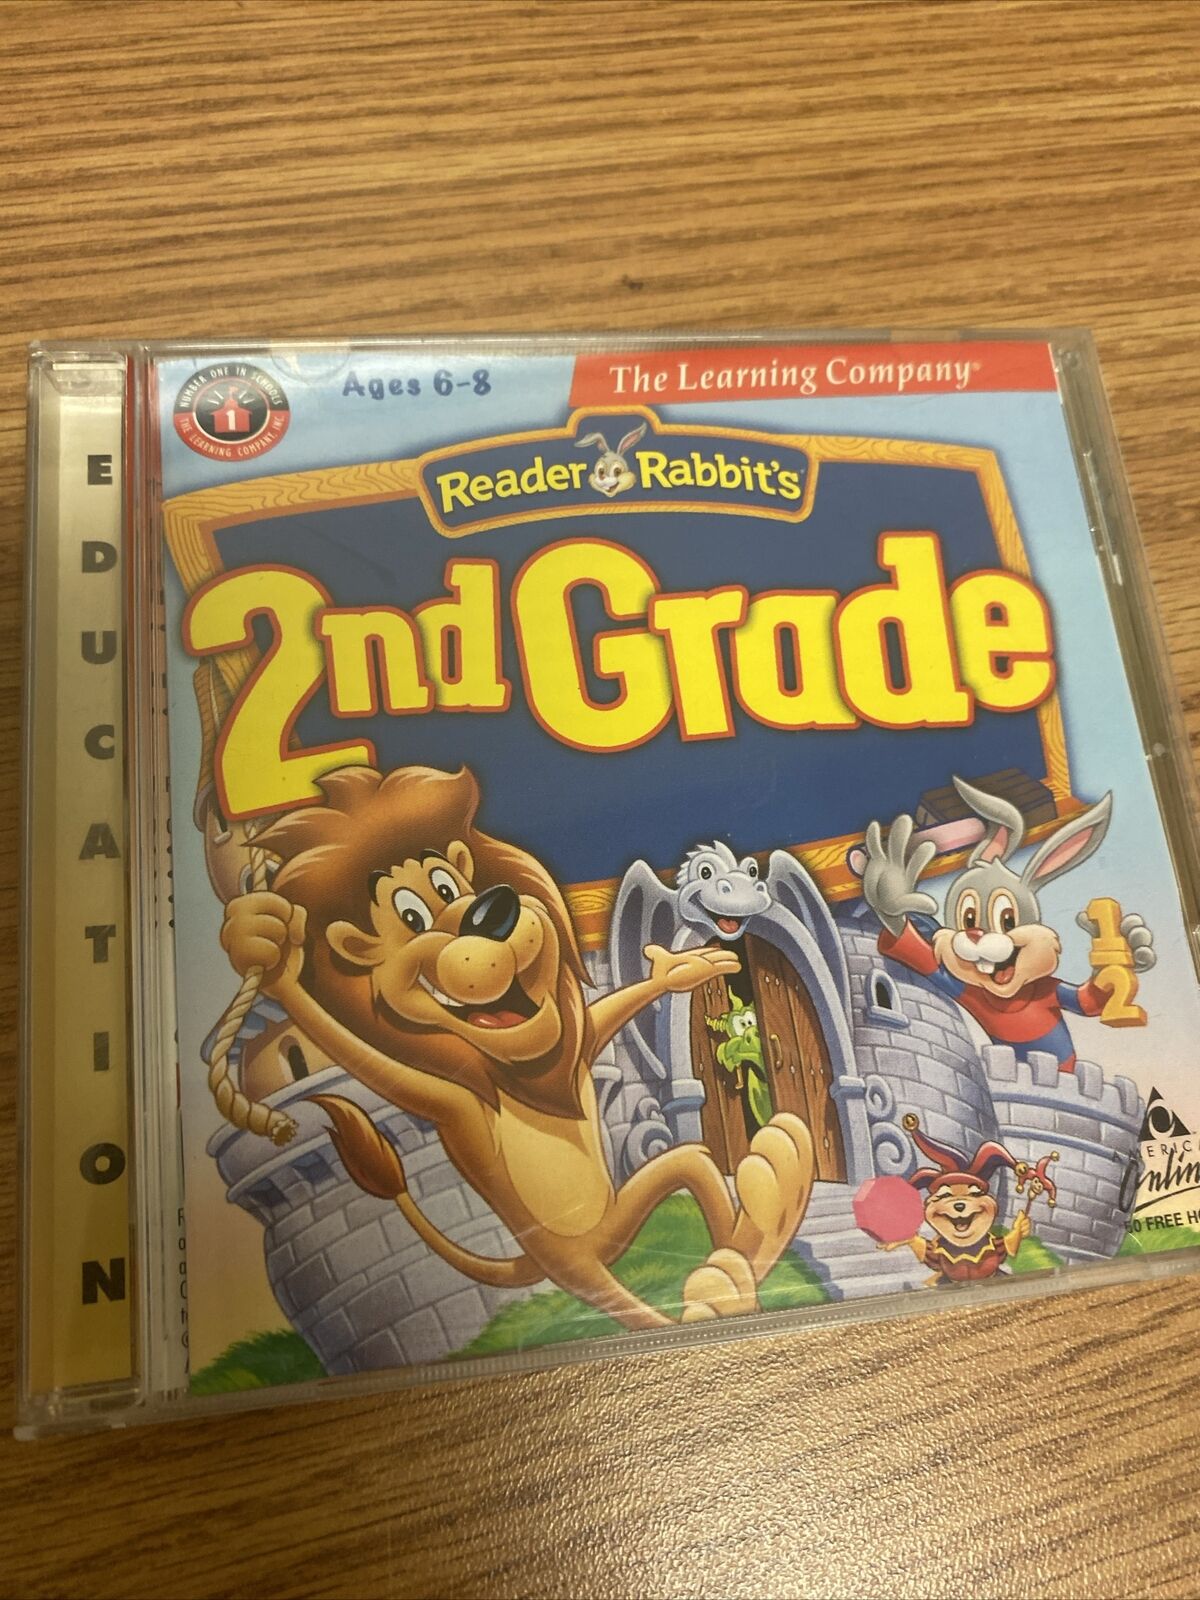 The Learning Company Reader Rabbit's Personalized 2nd Grade for PC CD-ROM, Mac